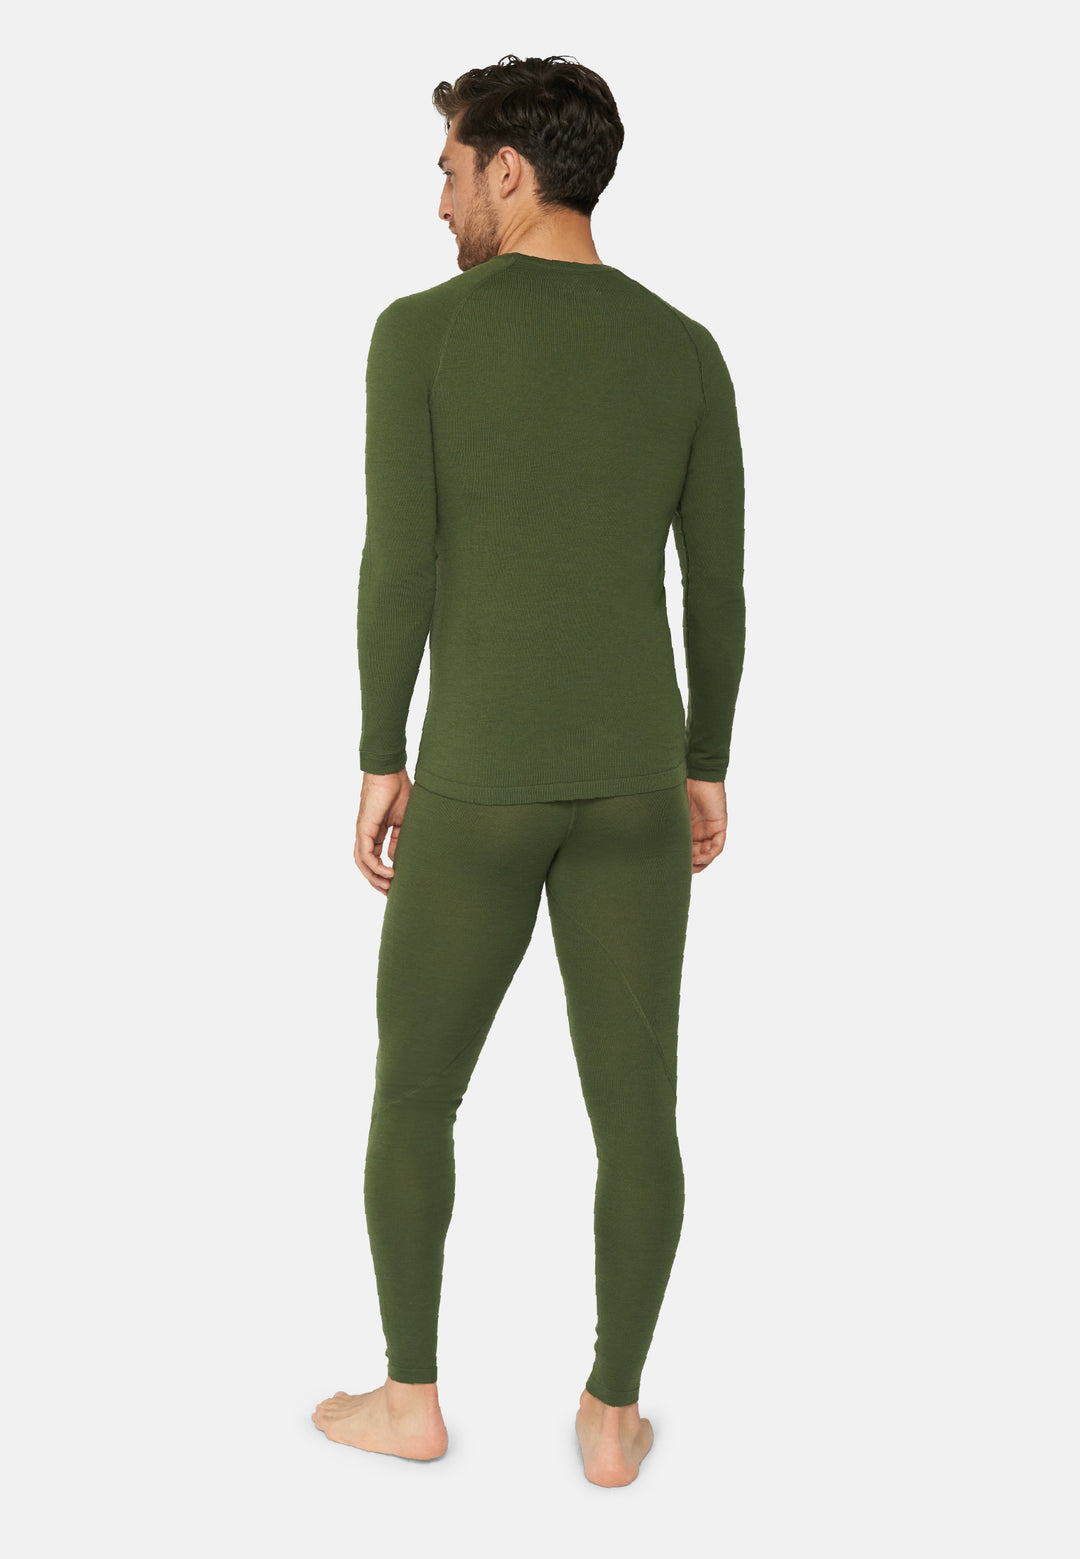 DANISH ENDURANCE Thermal Underwear Set Recycled Material Base layer Unisex  XS